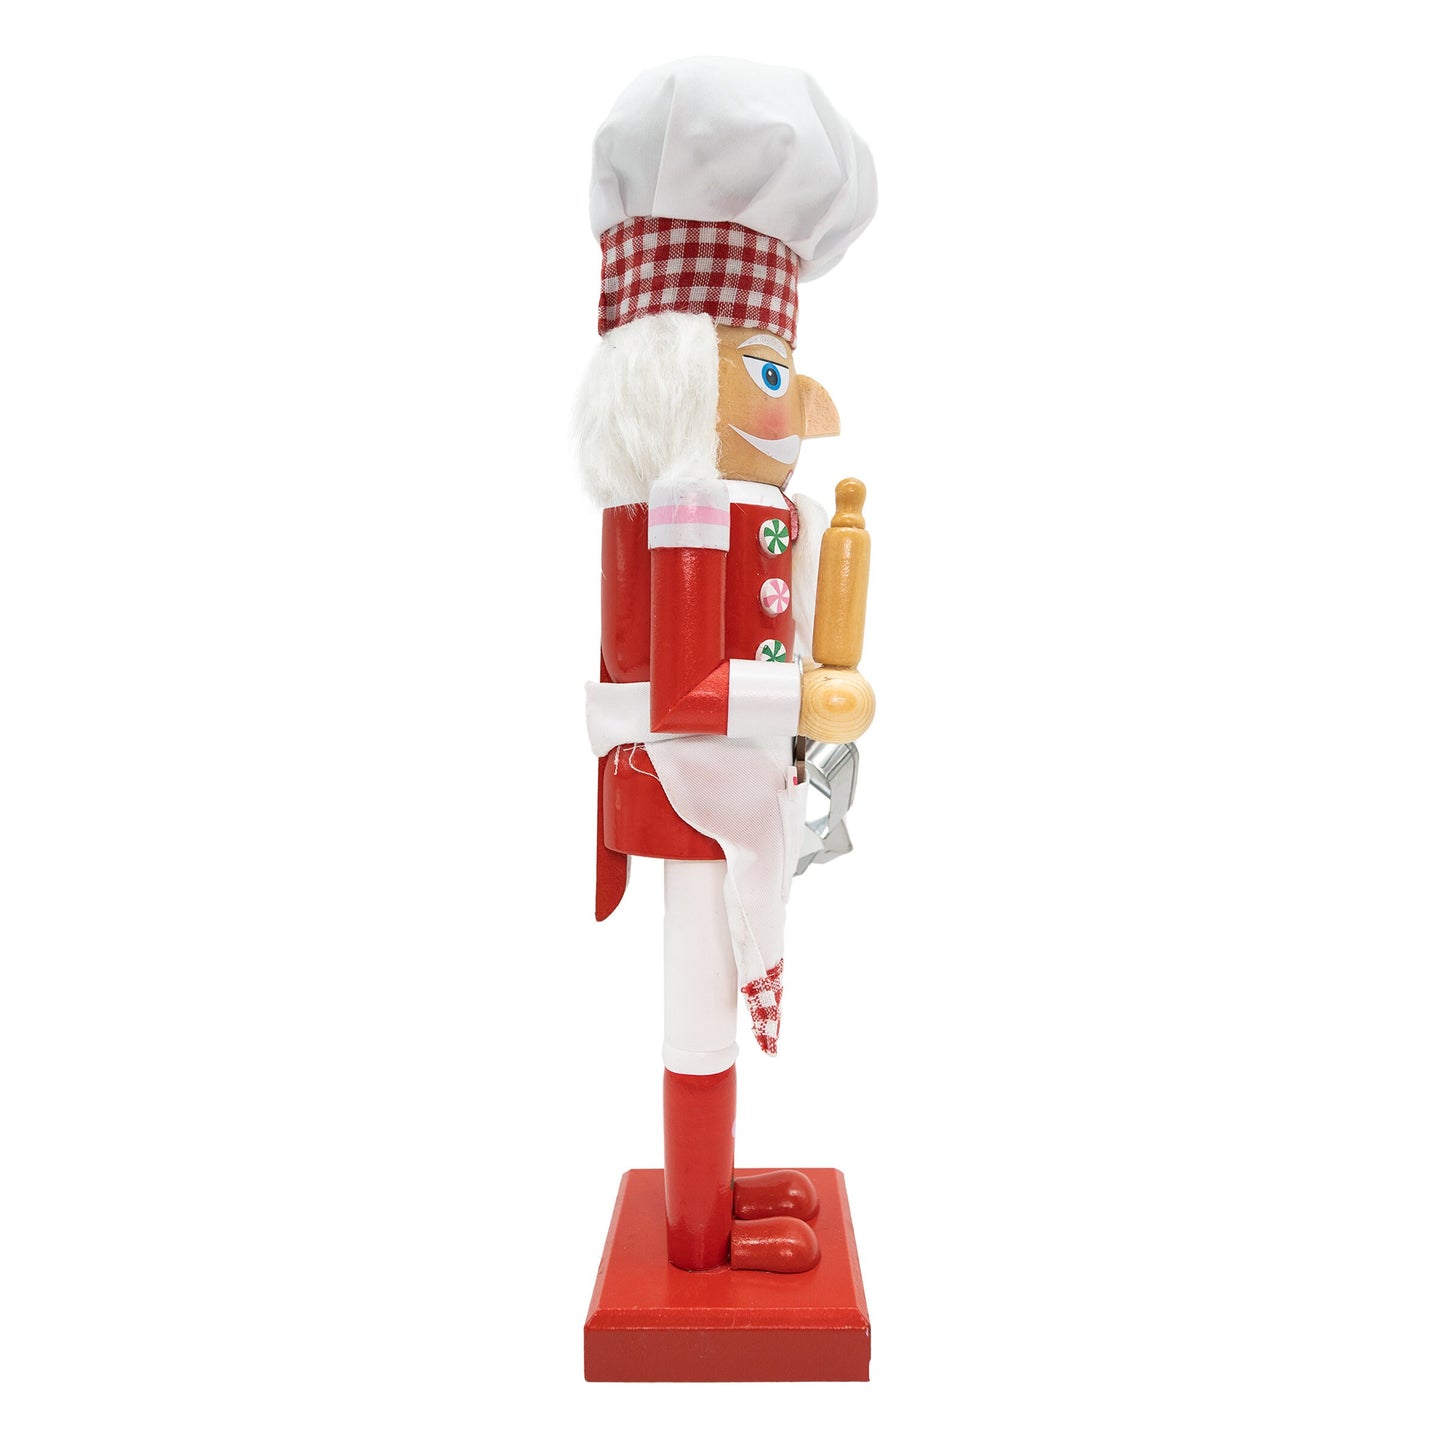 14-inch Wooden Nutcracker Christmas Decoration | Red-Baker Chef Figure | Holiday Decor